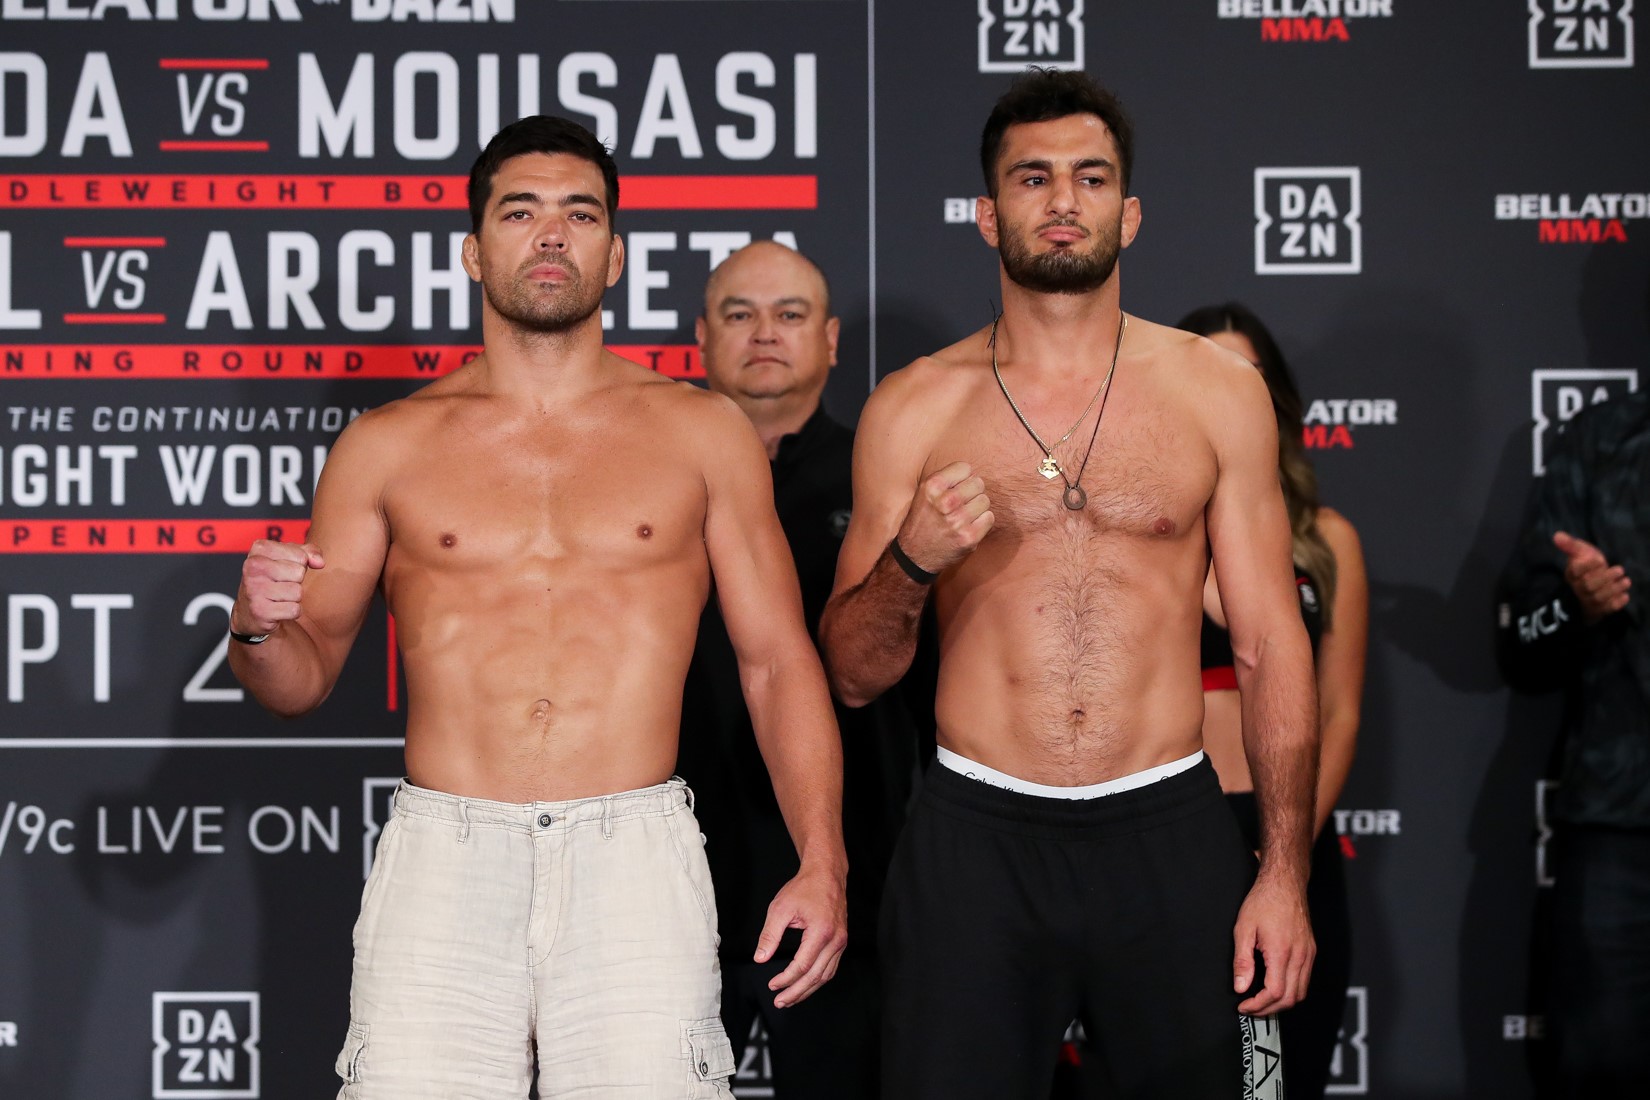 Bellator 228 weigh-in results from Inglewood, California1650 x 1100